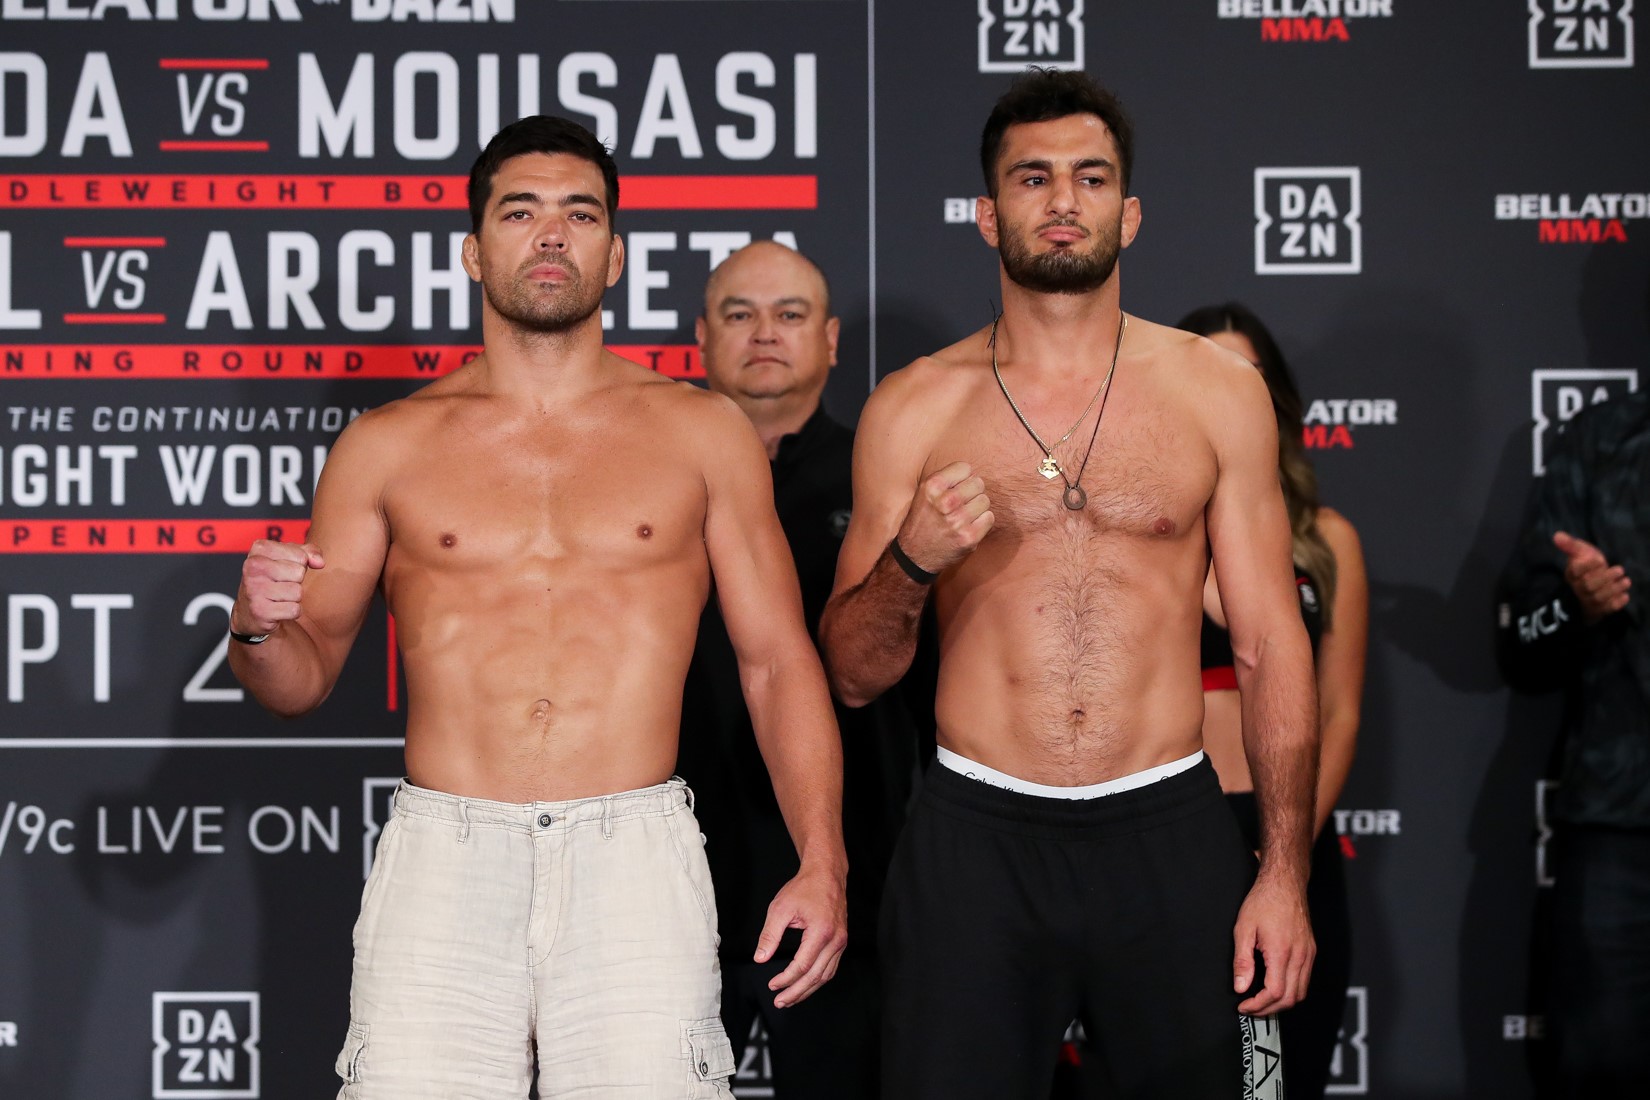 Bellator 228 weigh-in results from Inglewood, California1650 x 1100